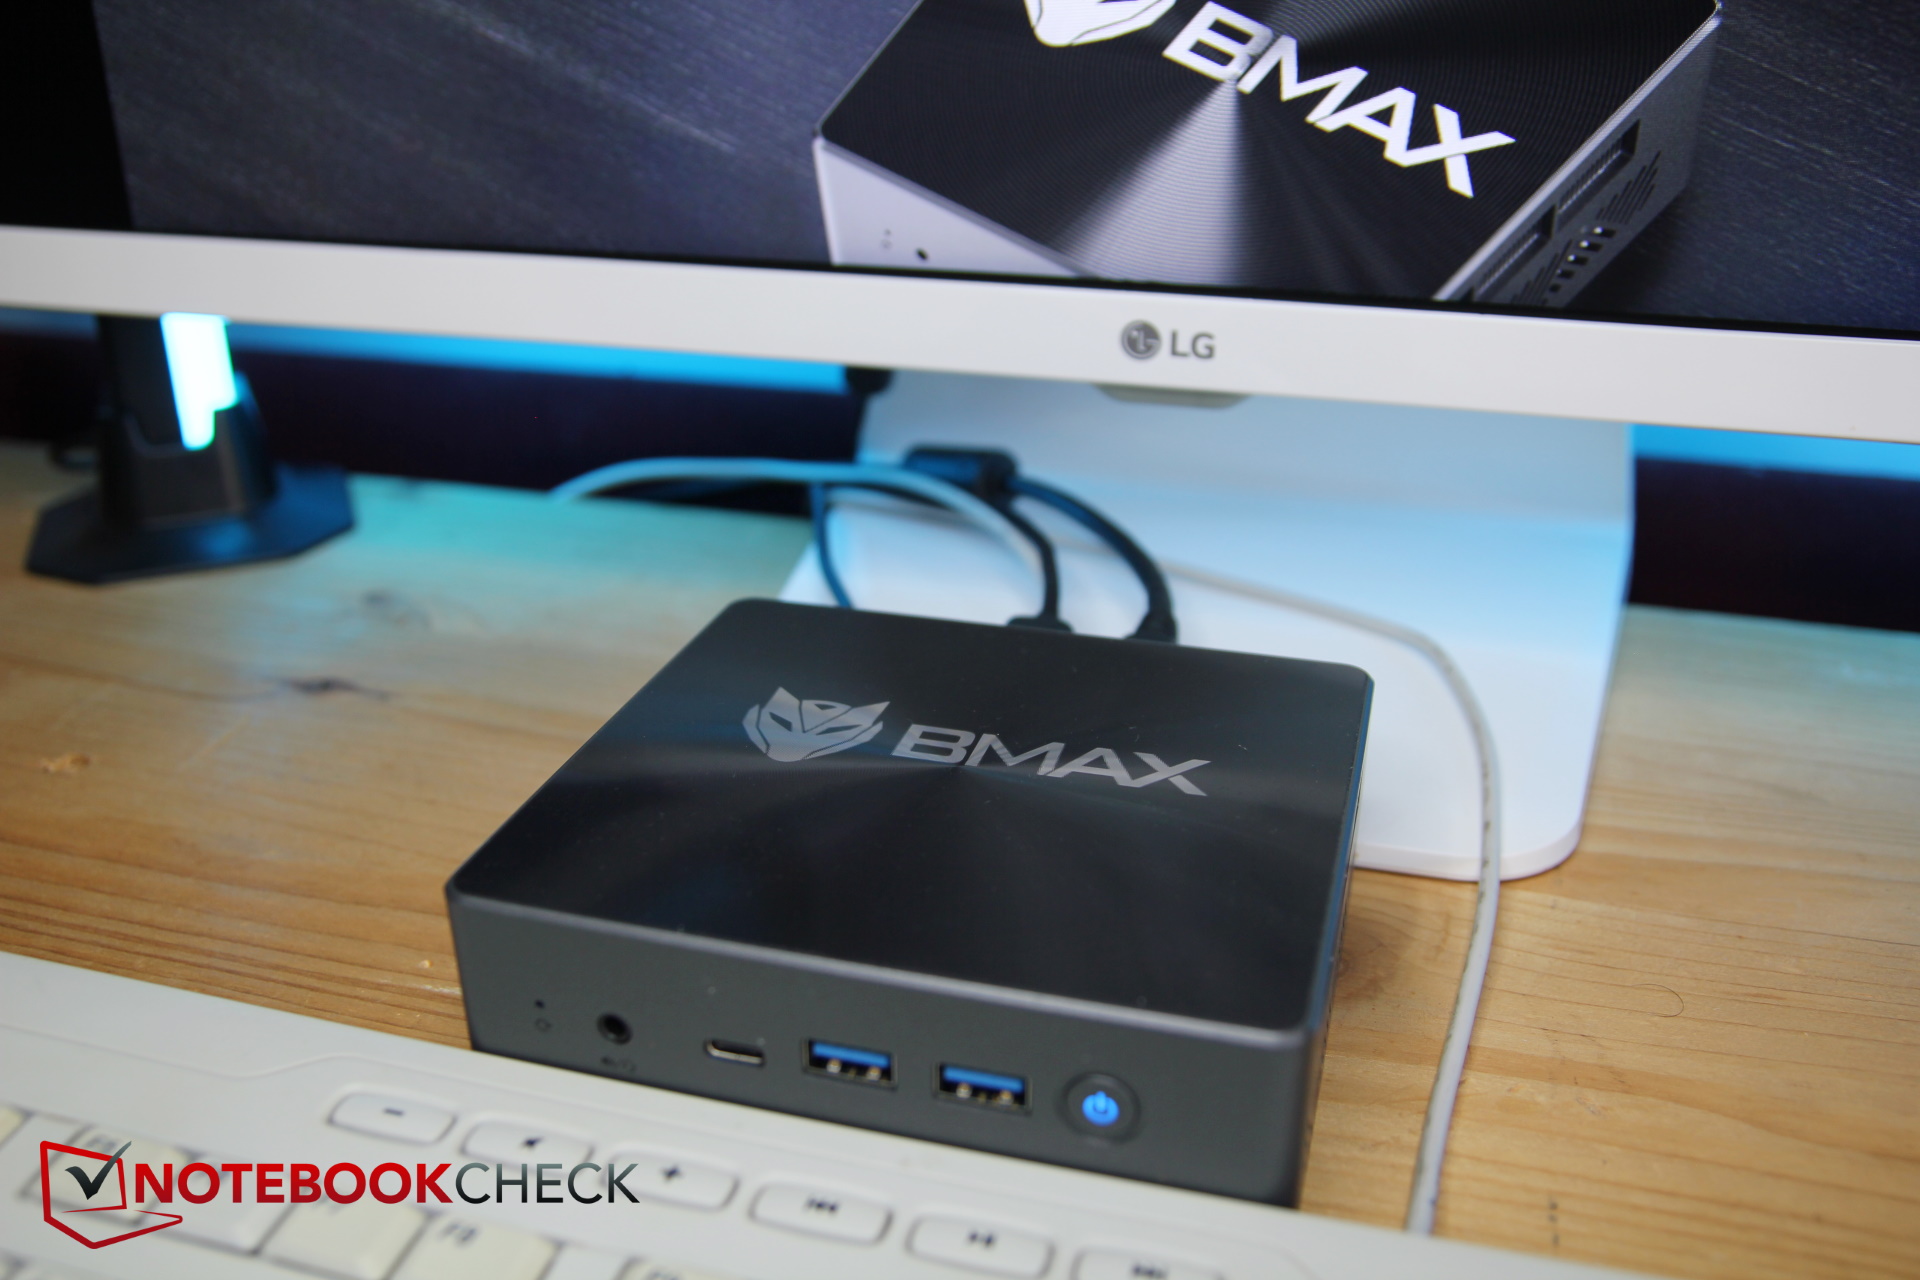 BMAX B7 Power review: A frugal mini PC with Intel Core i7 for US$400 -   Reviews